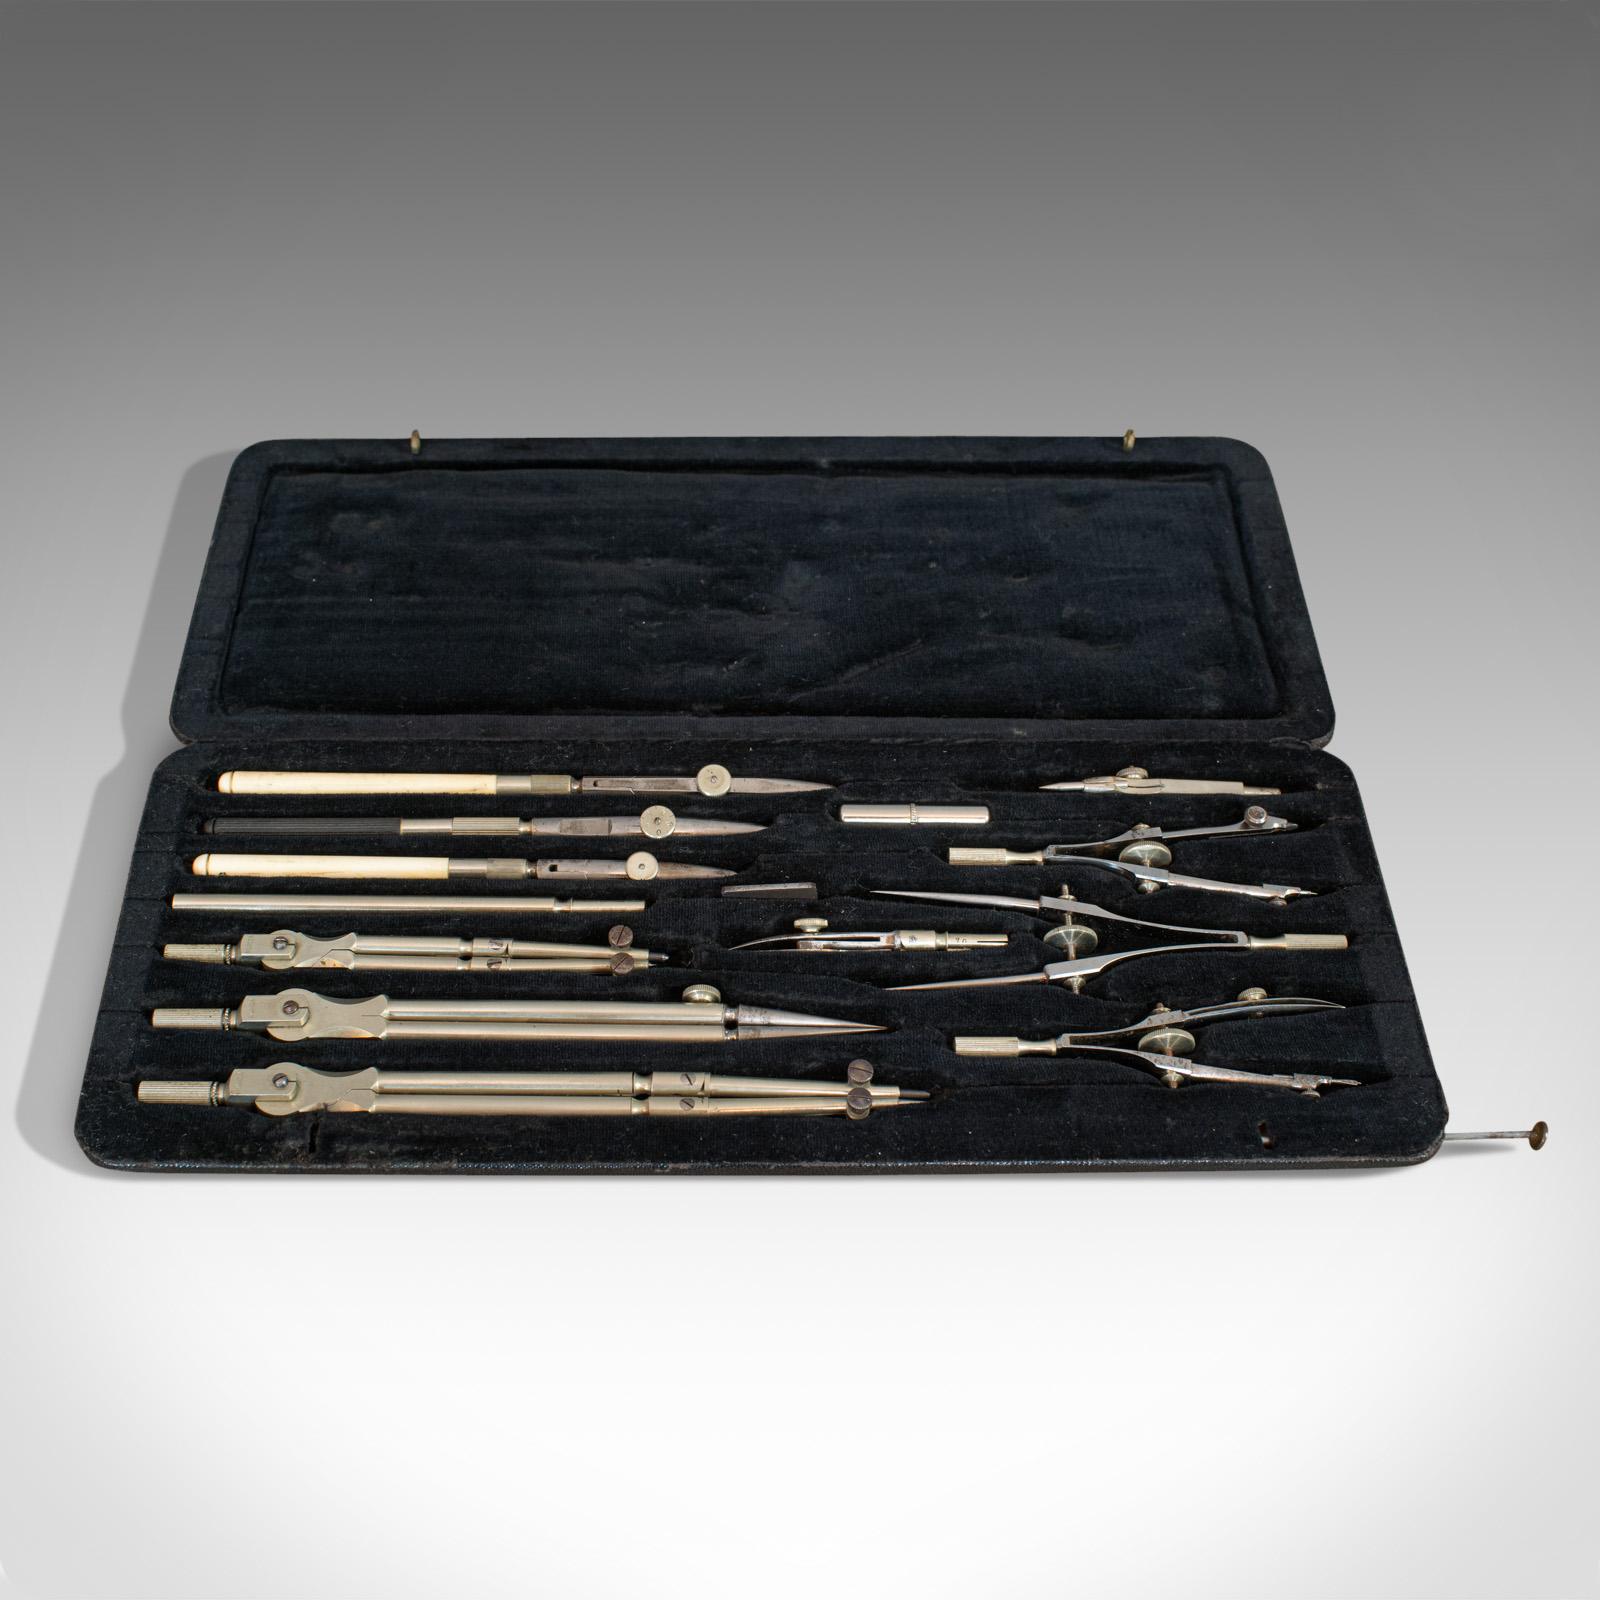 This is an antique technical drawing set. A German, silver nickel set of cartographer's instruments by Riefler, dating to the early 20th century, circa 1920.

Quality, early 20th century set
Displays a desirable aged patina
Silver nickel